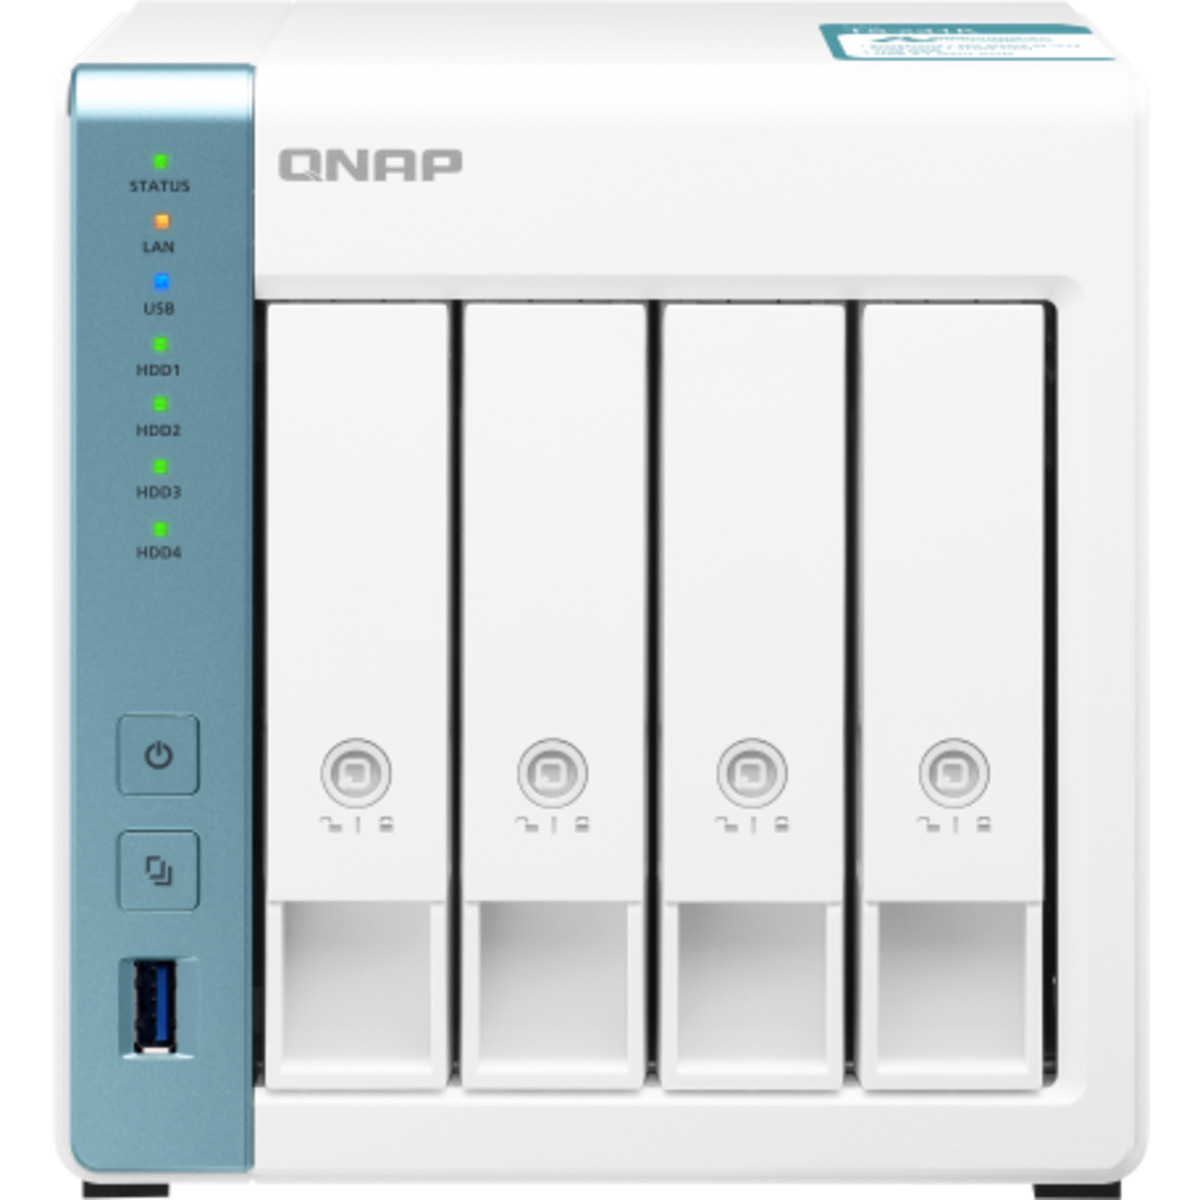 QNAP TS-431K 8tb 4-Bay Desktop Personal / Basic Home / Small Office NAS - Network Attached Storage Device 2x4tb Seagate EXOS 7E10 ST4000NM024B 3.5 7200rpm SATA 6Gb/s HDD ENTERPRISE Class Drives Installed - Burn-In Tested TS-431K